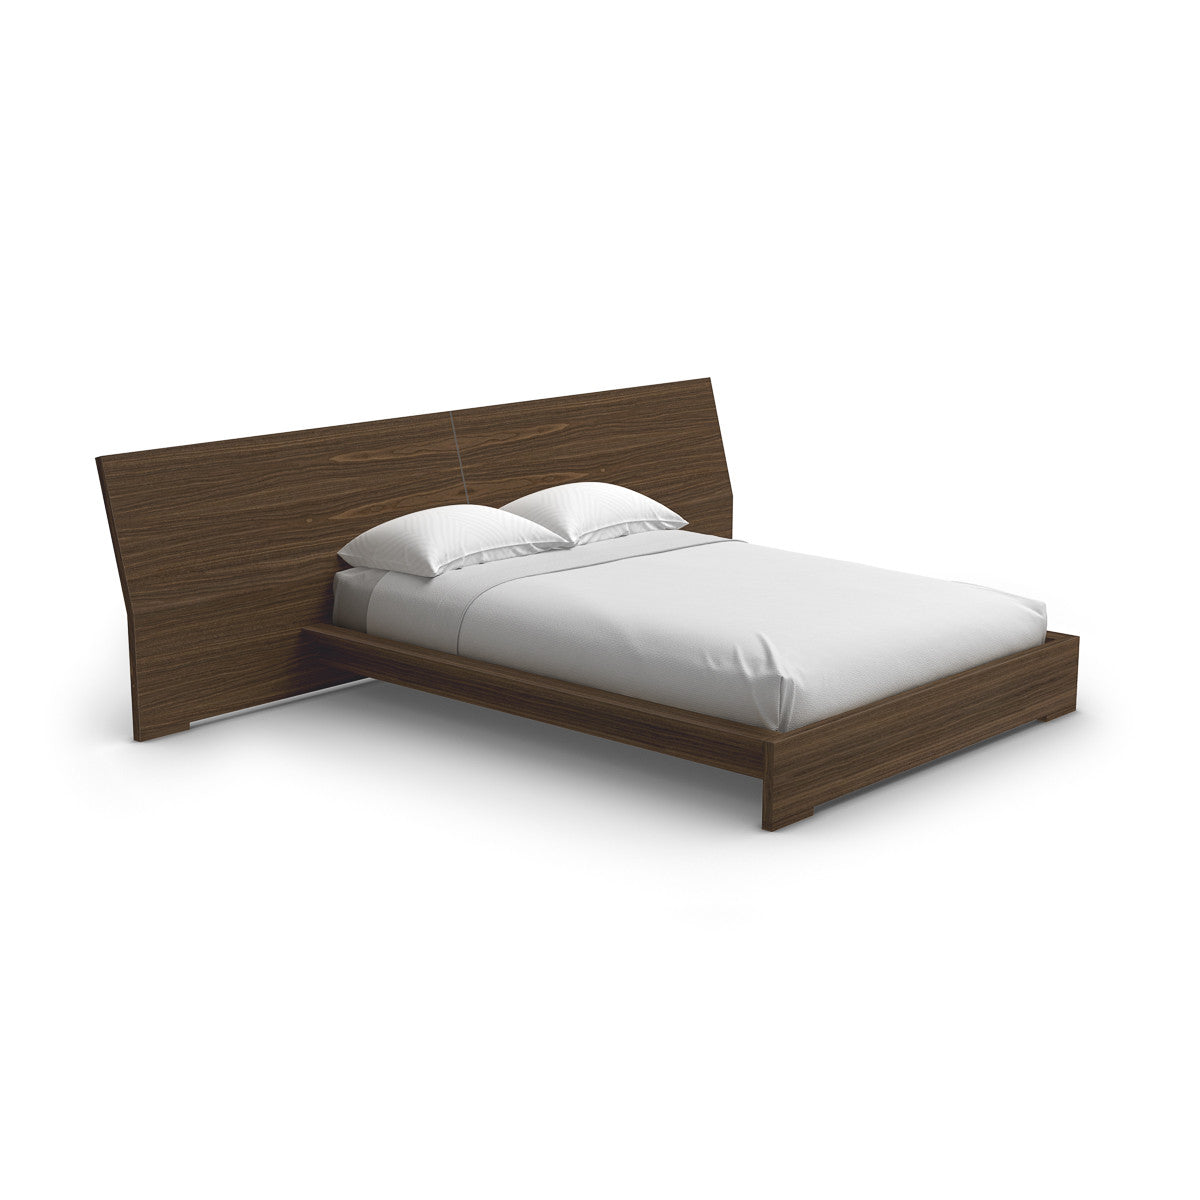 Picture of Sonoma Bed - King - Wide Headboard